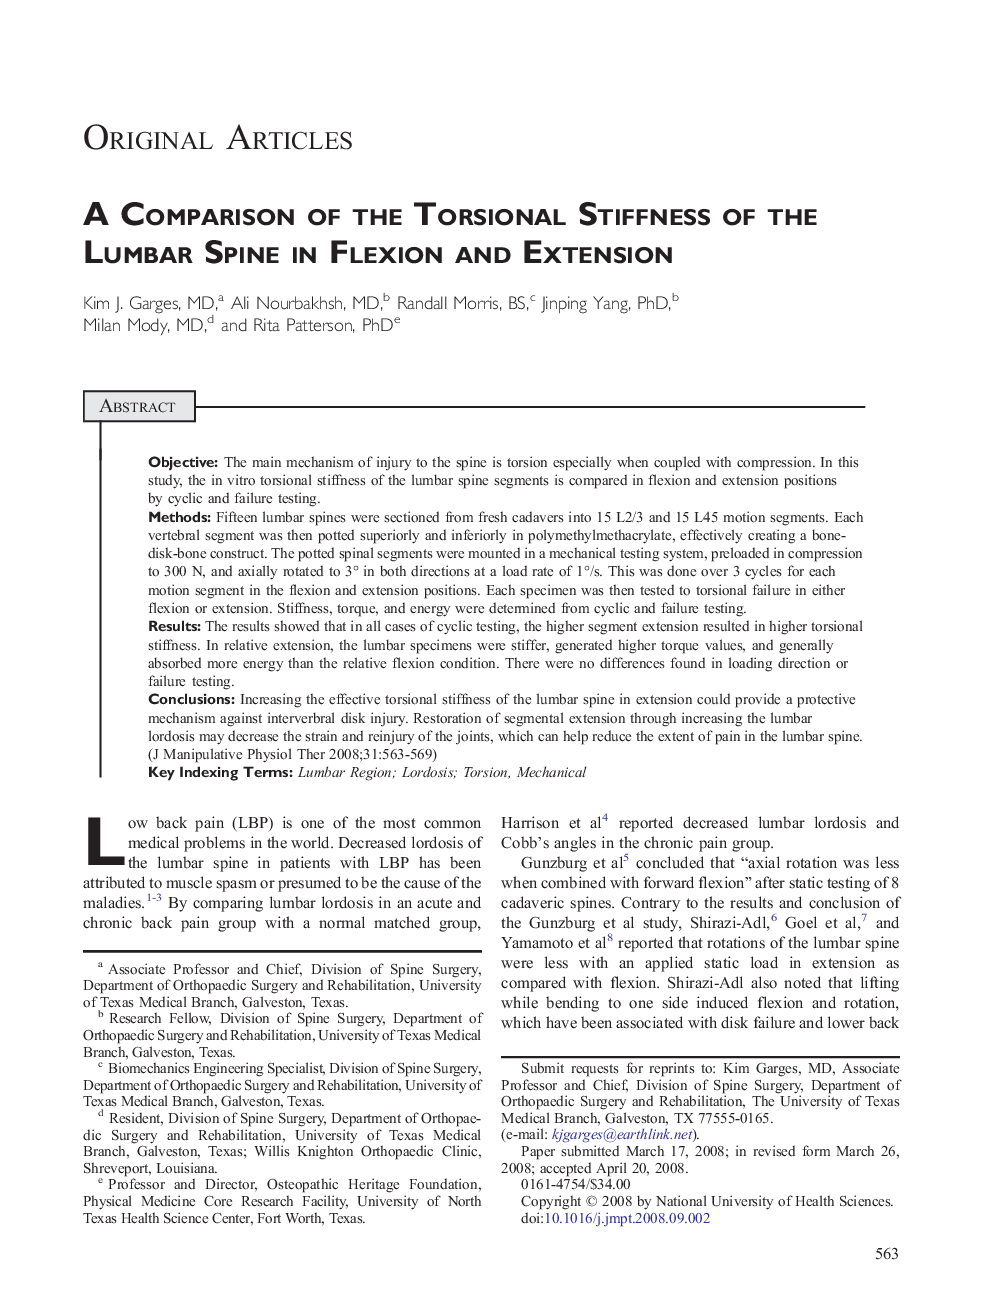 A Comparison of the Torsional Stiffness of the Lumbar Spine in Flexion and Extension